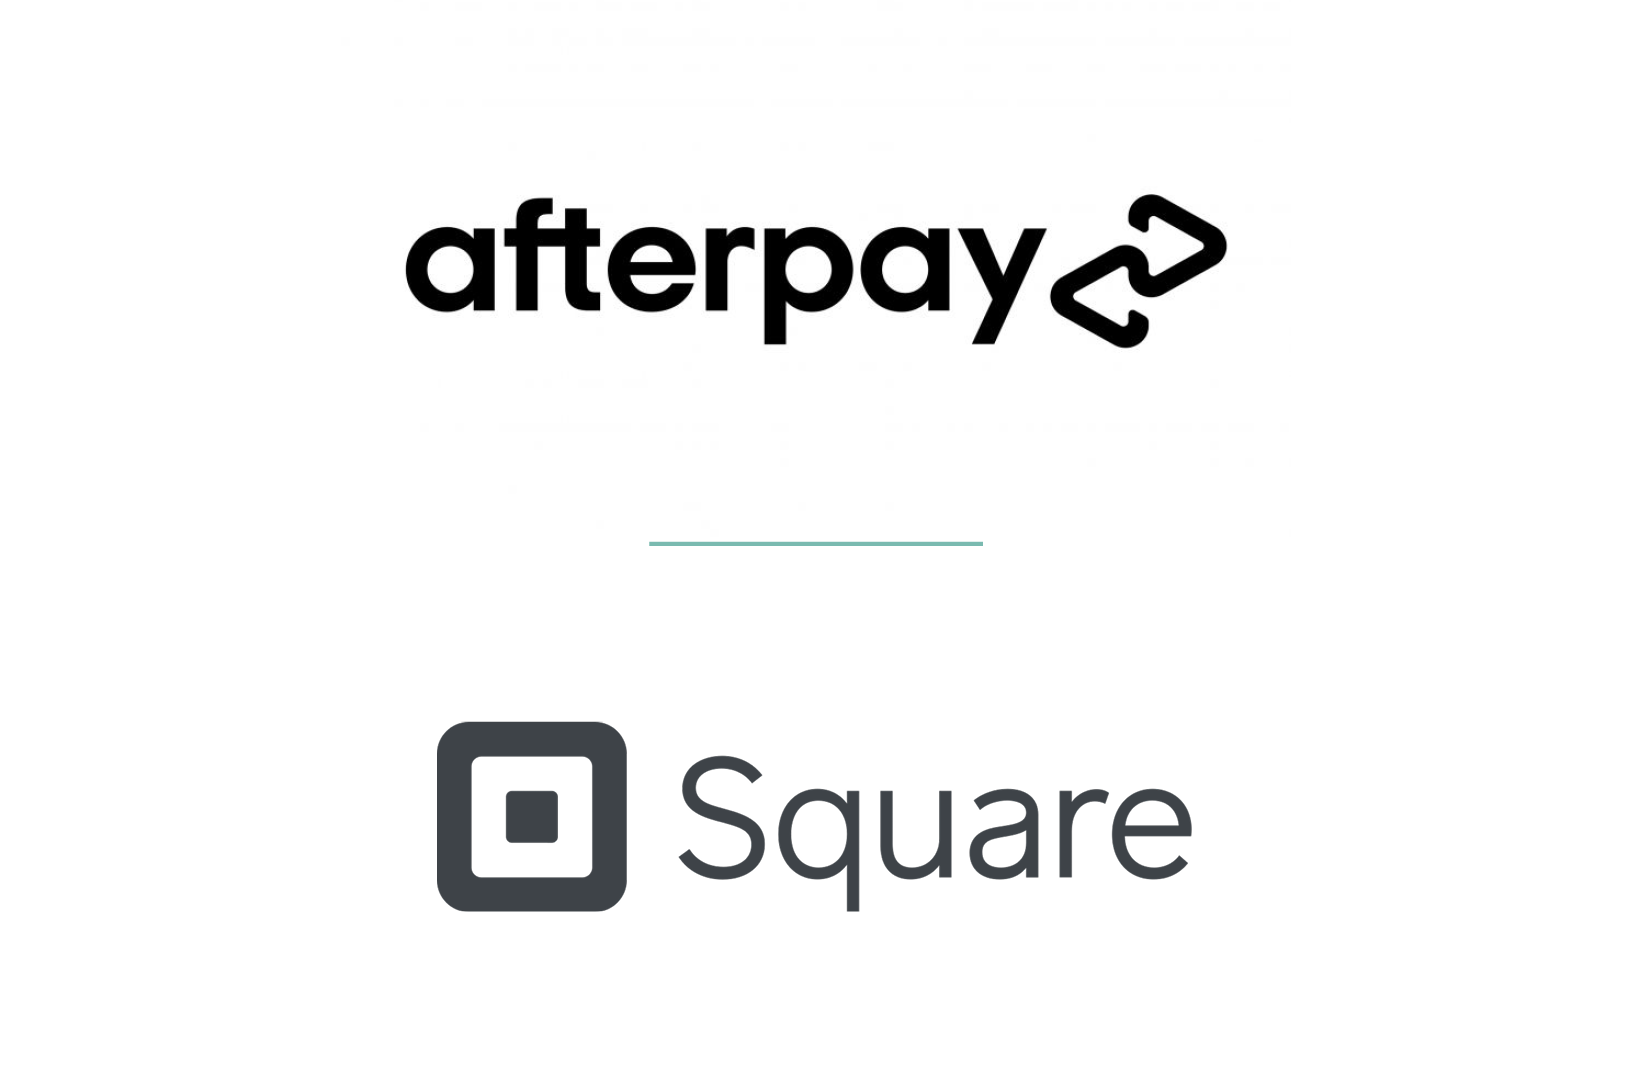 Square Inc. Acquires Afterpay  Big Name Mergers & Acquisition